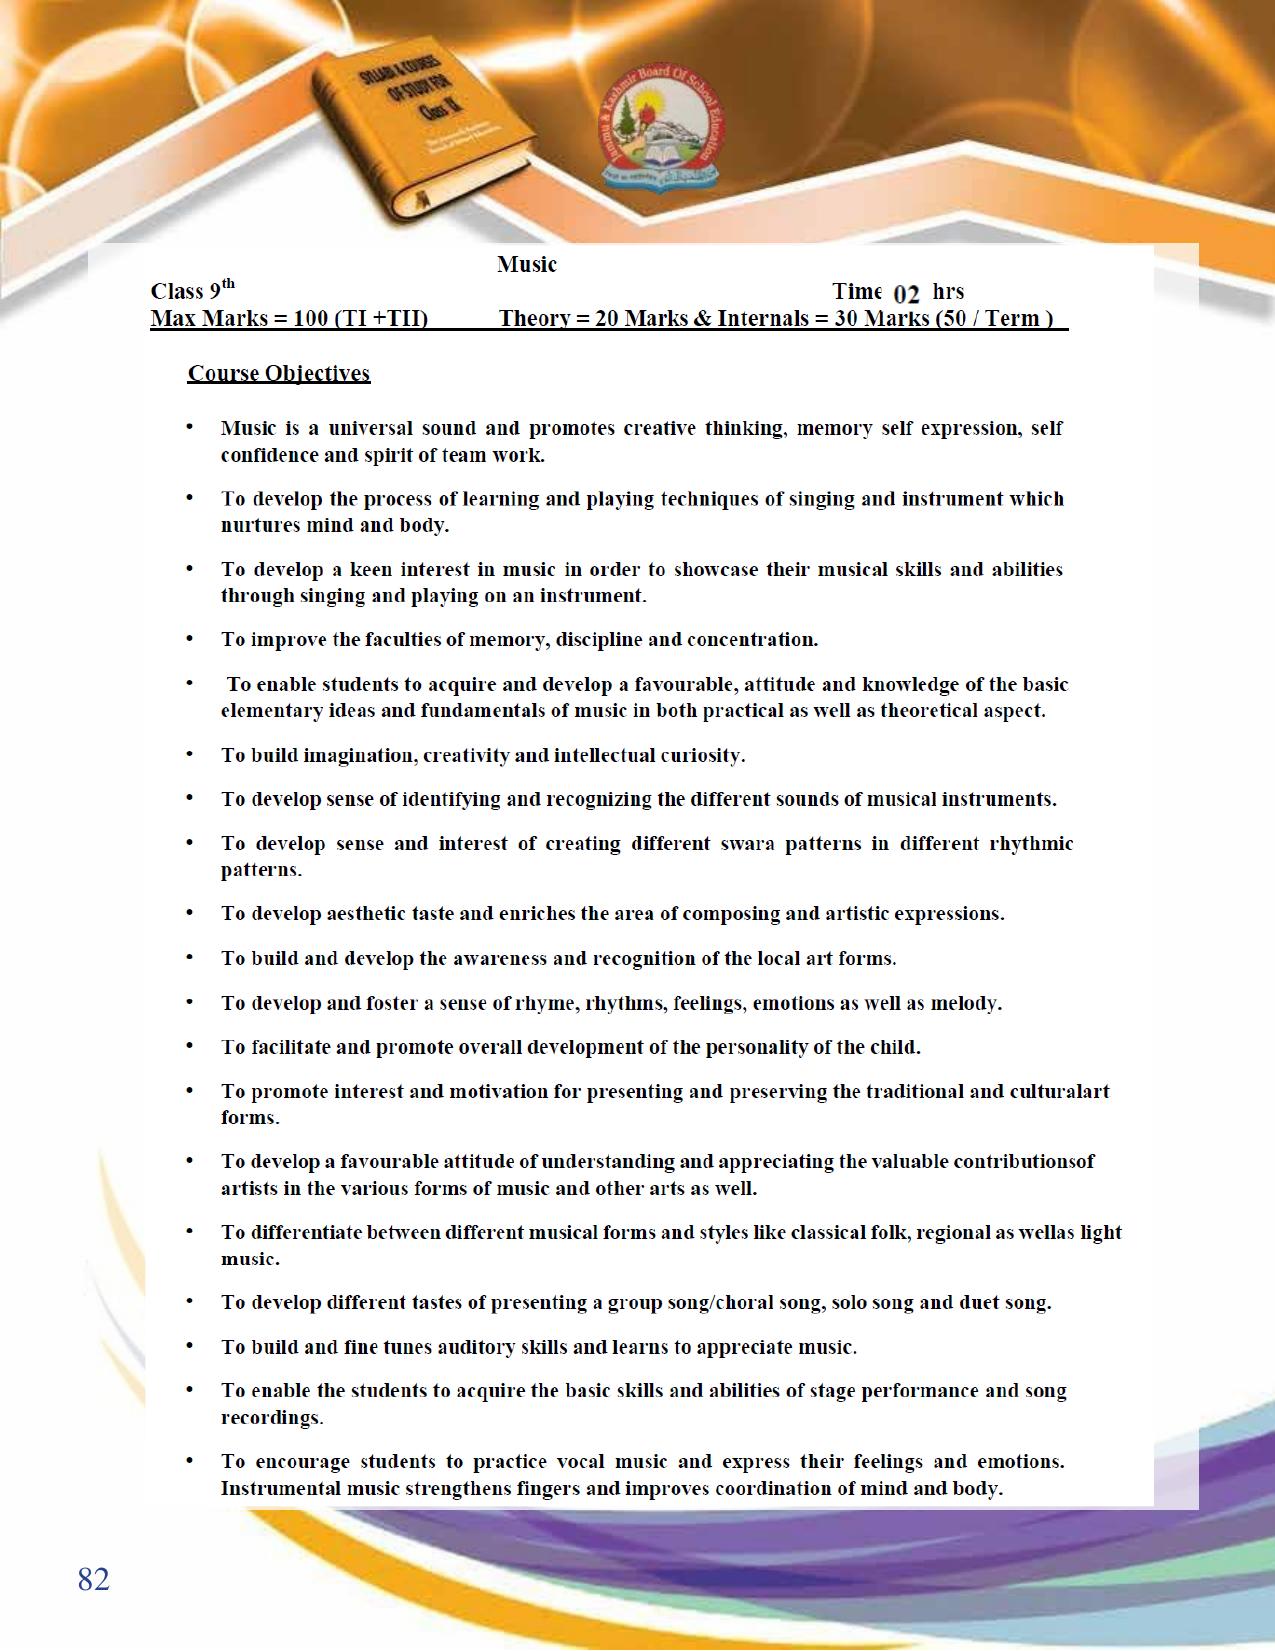 JKBOSE Syllabus for 9th class - Page 83